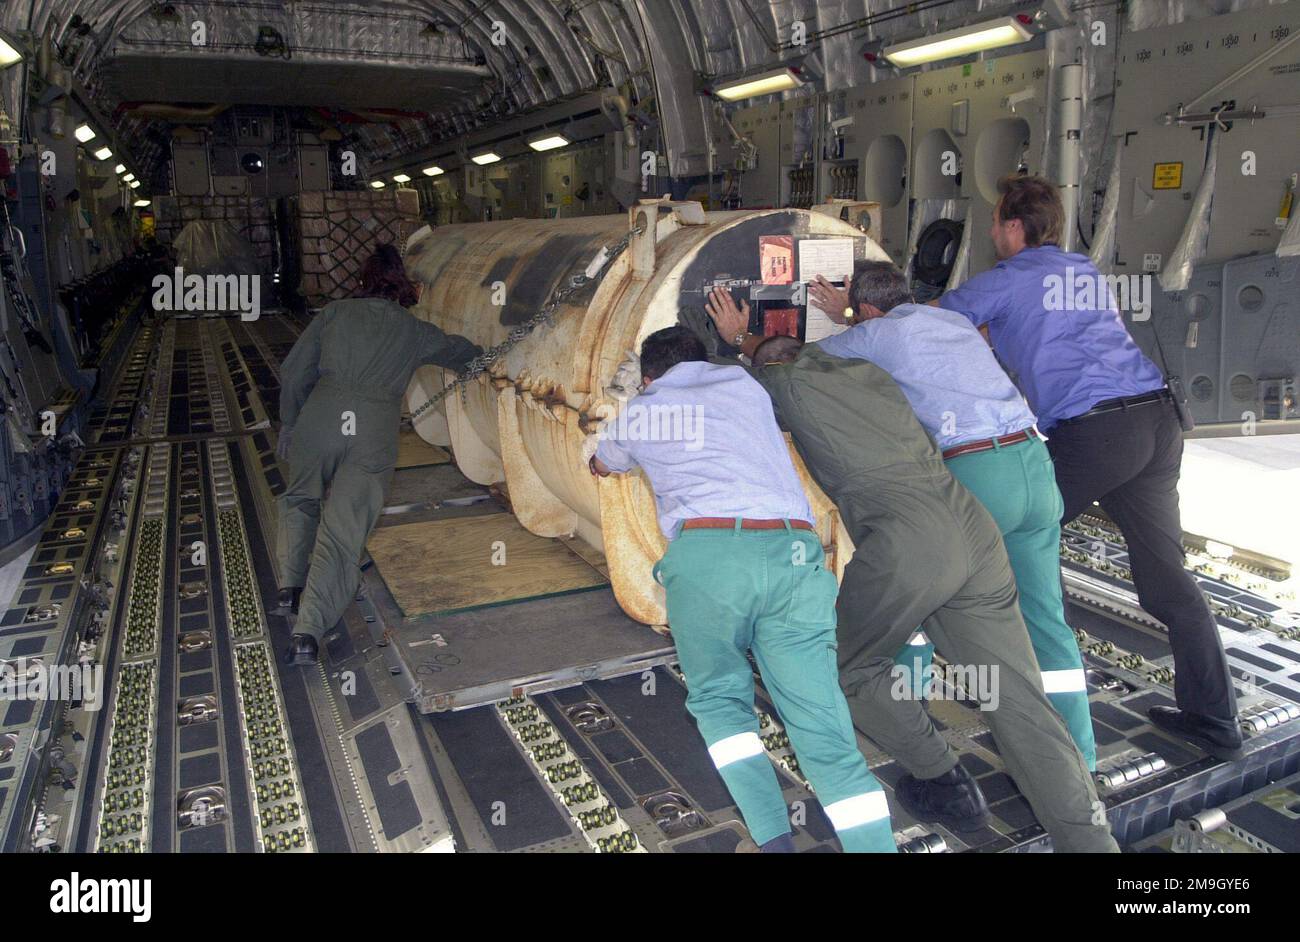 SENIOR AIRMAN Vikki Bruemmer, US Air Force (USAF), loadmaster, 17th Airlift Squadron, Charleston AFB, South Carolina, along with local national workers, load a pallet of cargo into the C-17A Globemaster at Naval Air Station (NAS) Sigonella, Sicily. Air Force members deployed to NAS Sigonella in support of Operation ENDURING FREEDOM. In response to the terrorist attacks on September 11, 2001 at the New York World Trade Center and the Pentagon, President George W. Bush initiated Operation ENDURING FREEDOM in support of the Global War on Terrorism (GWOT), fighting terrorism abroad. Subject Operat Stock Photo